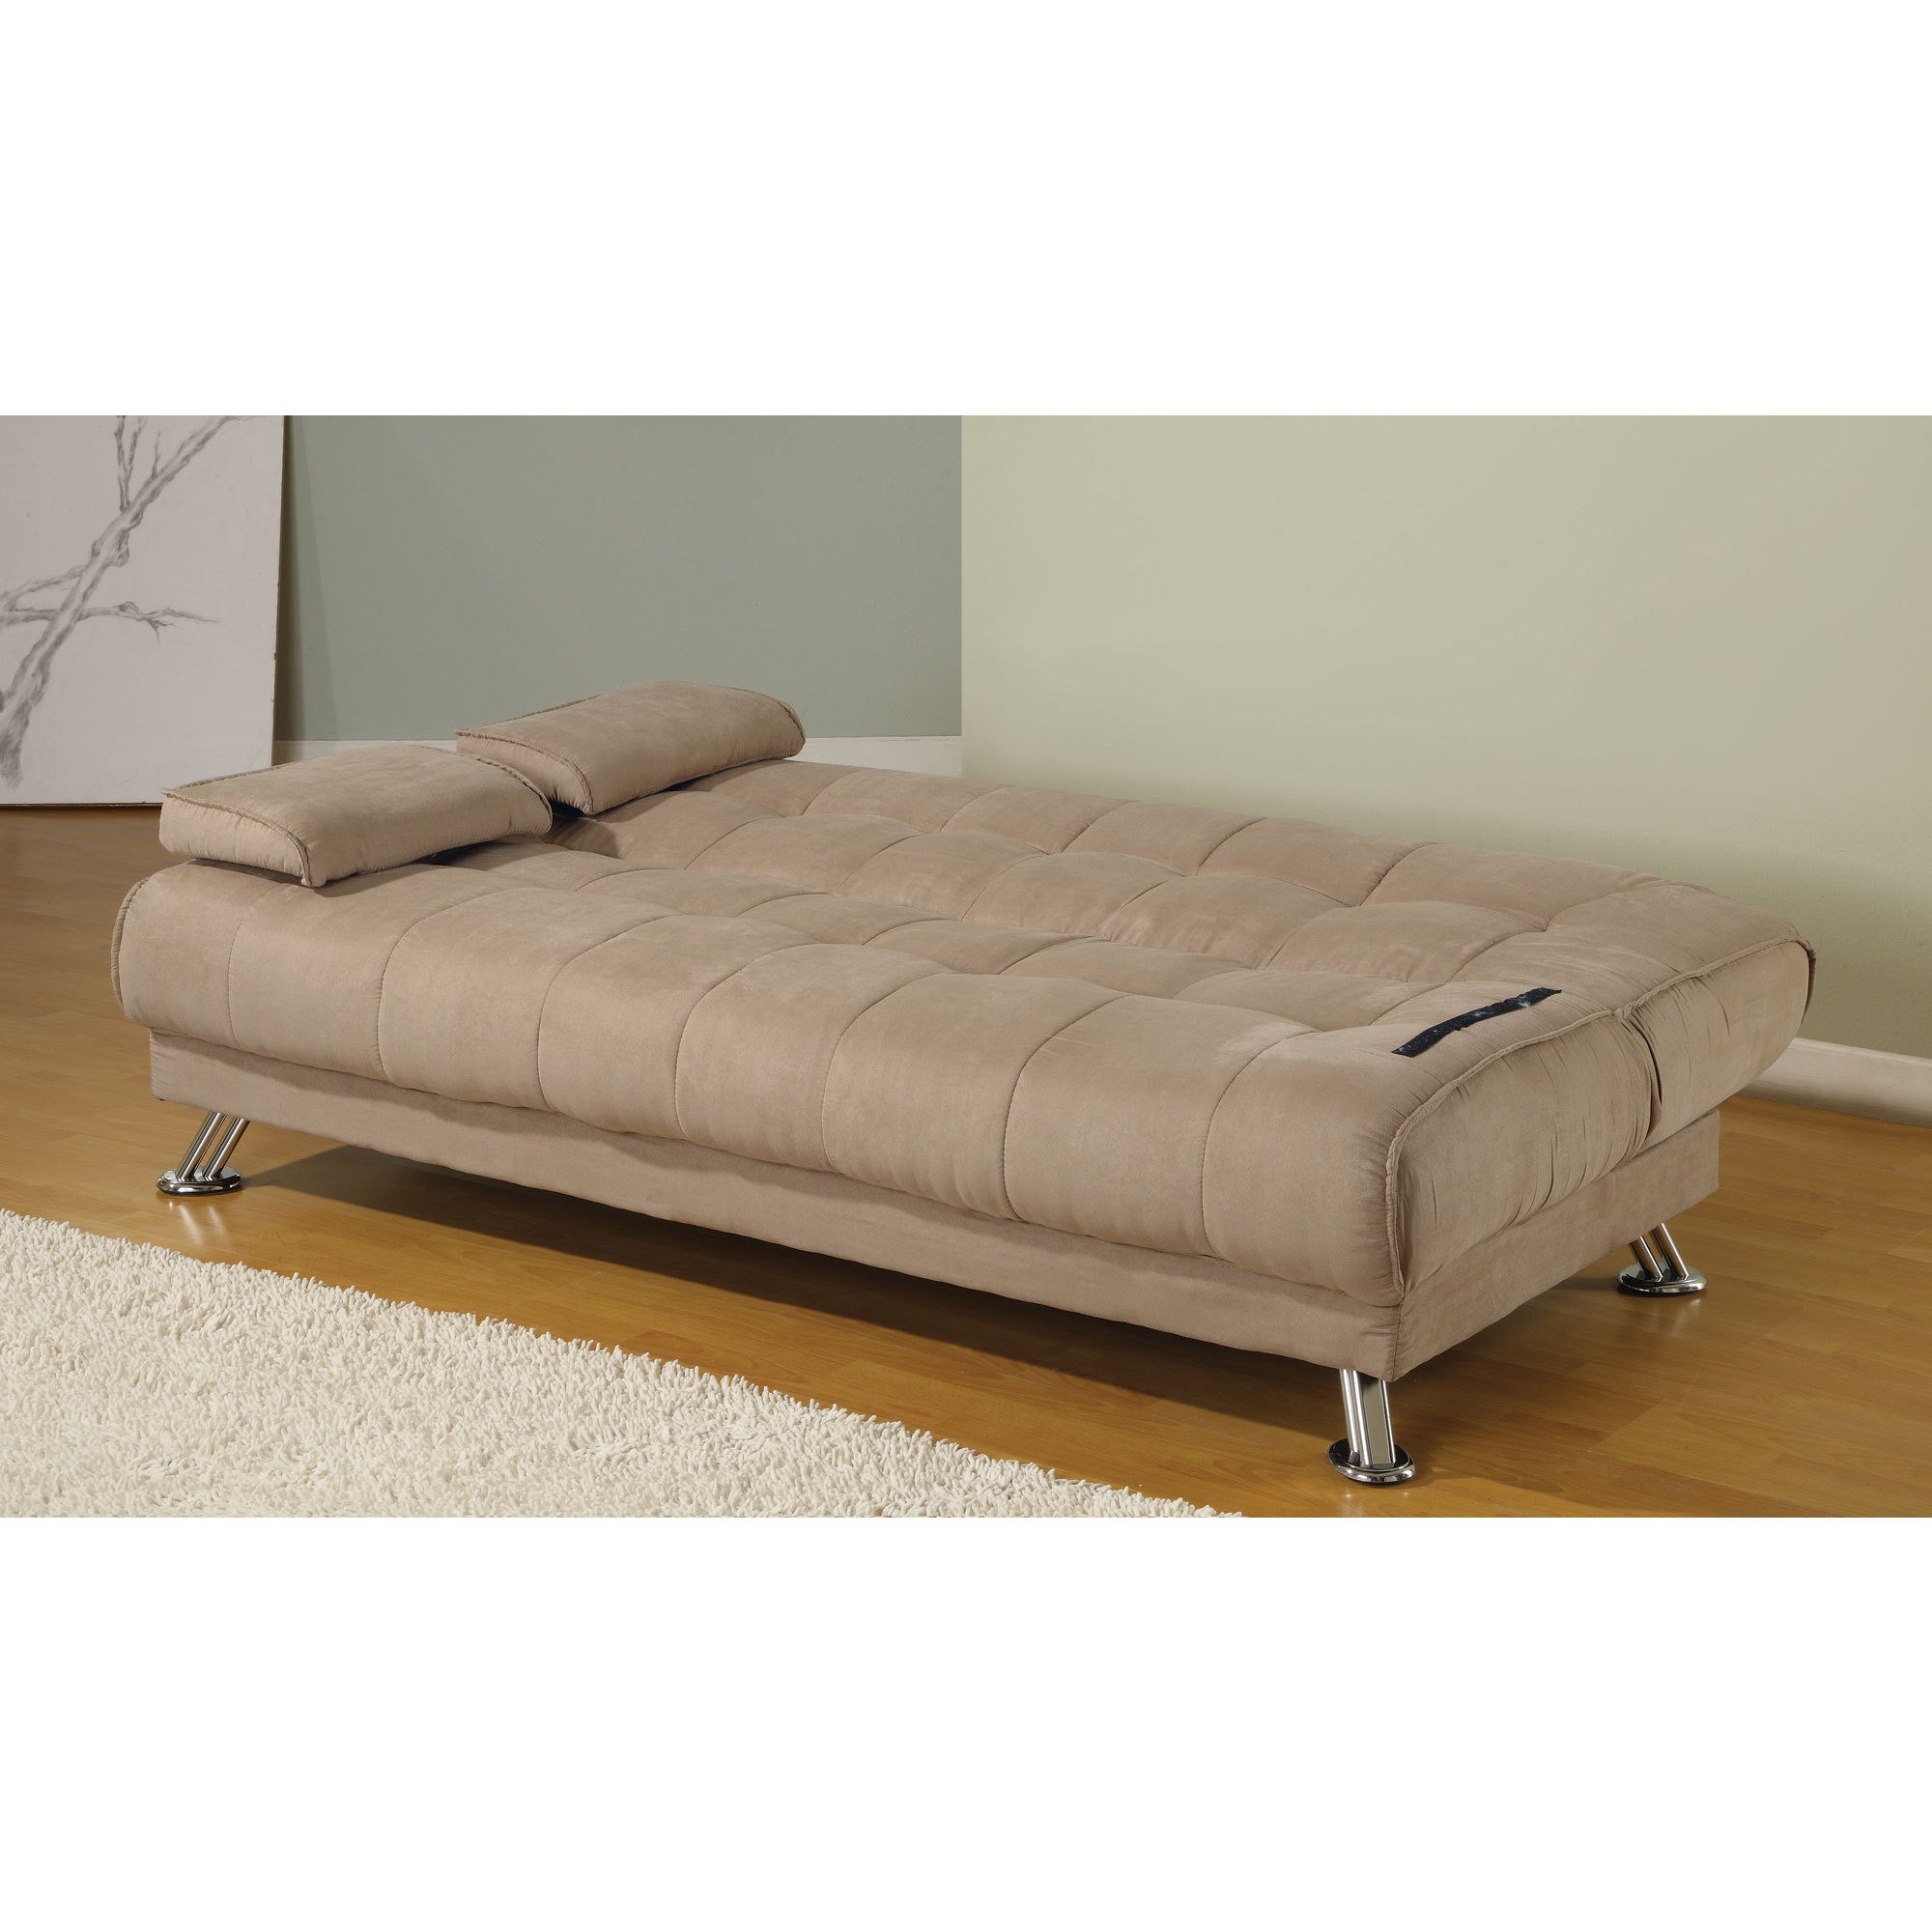 Shop Coaster Company Tan Microfiber Sofa Bed - On Sale - Free Shipping  Today - Overstock - 12189298